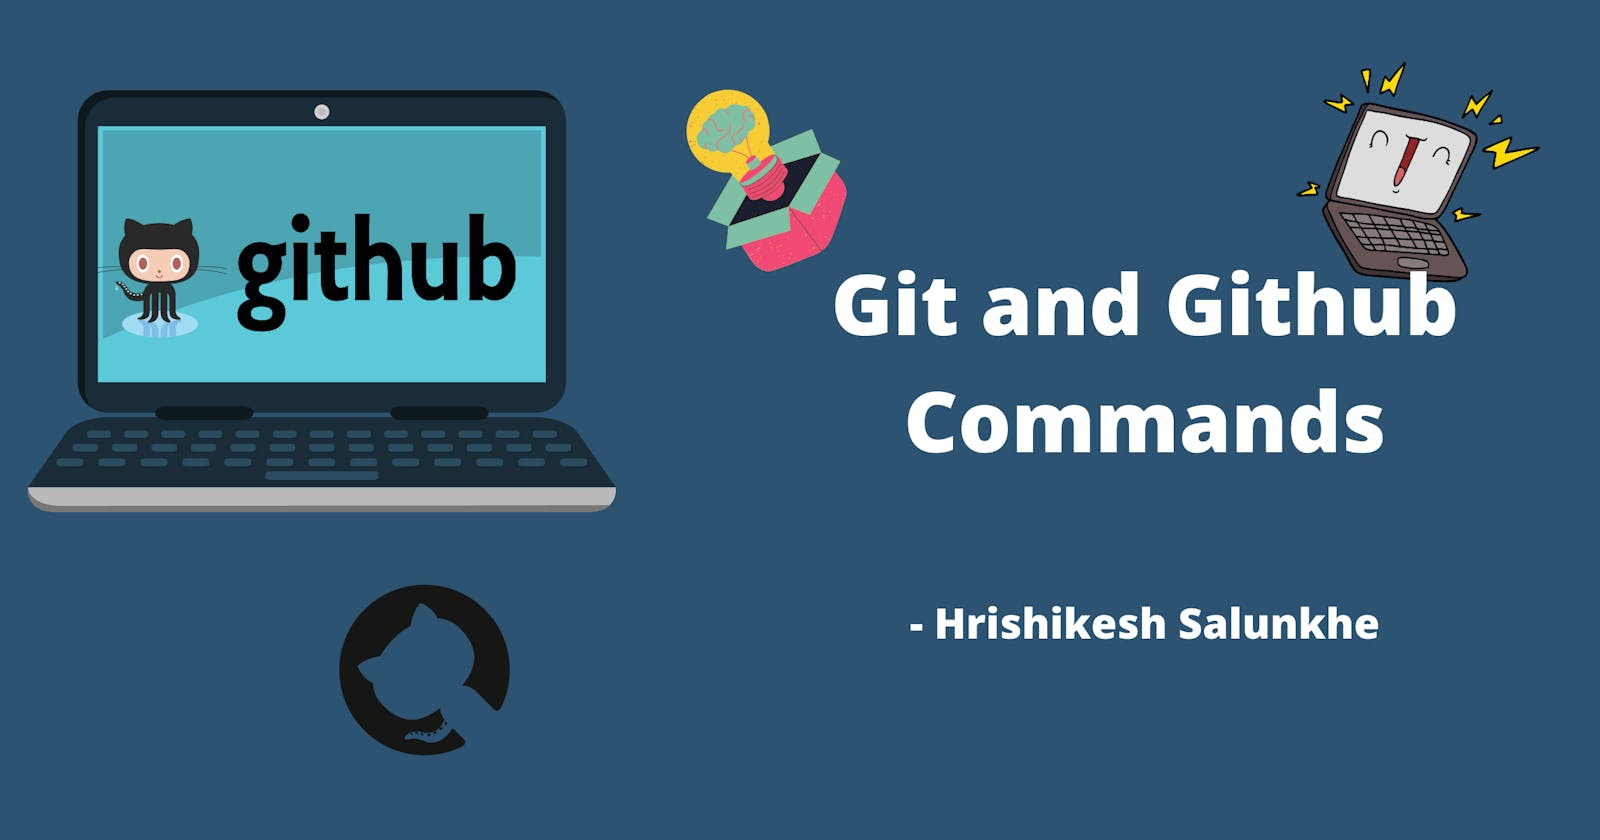 What is Git? How to use Git commands in Terminal?